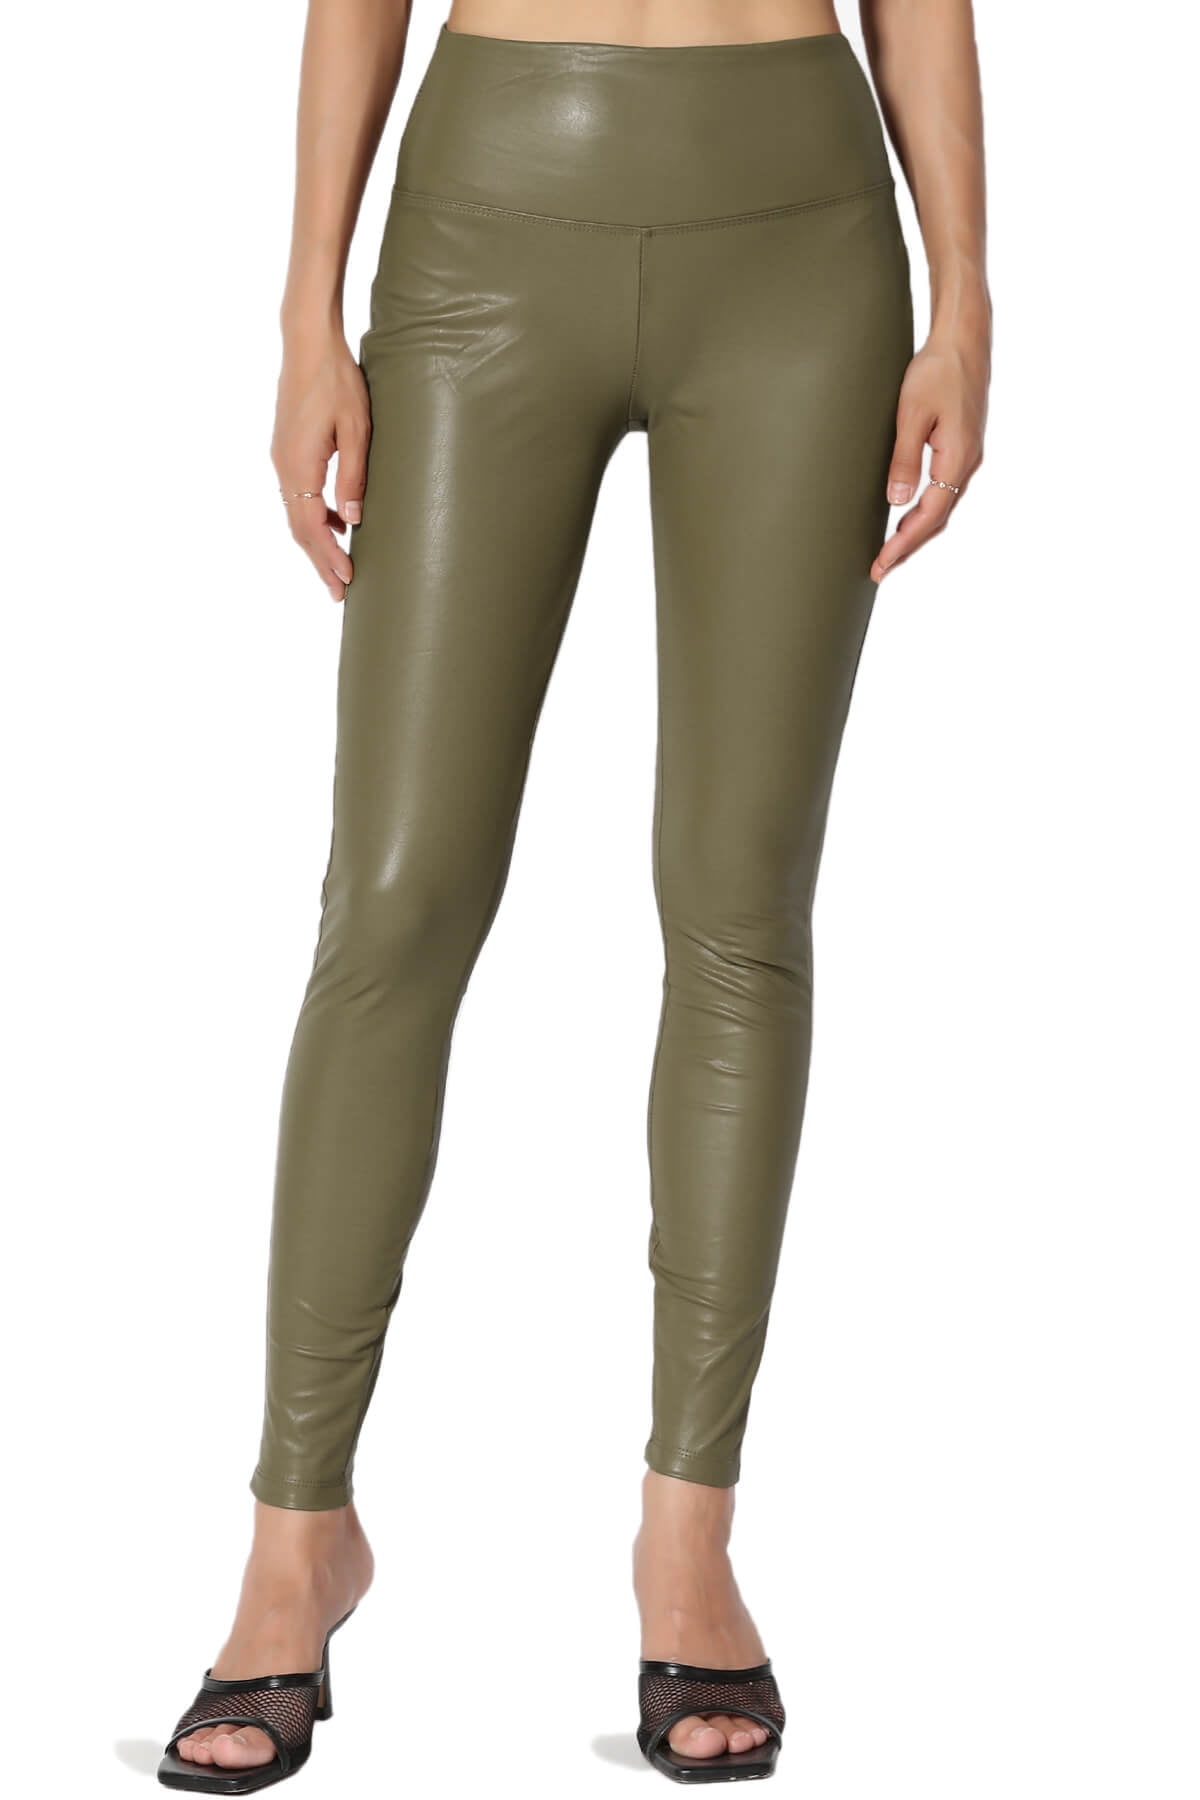 Women's Sexy Stretchy Faux Leather Leggings Wide High Waist Tight